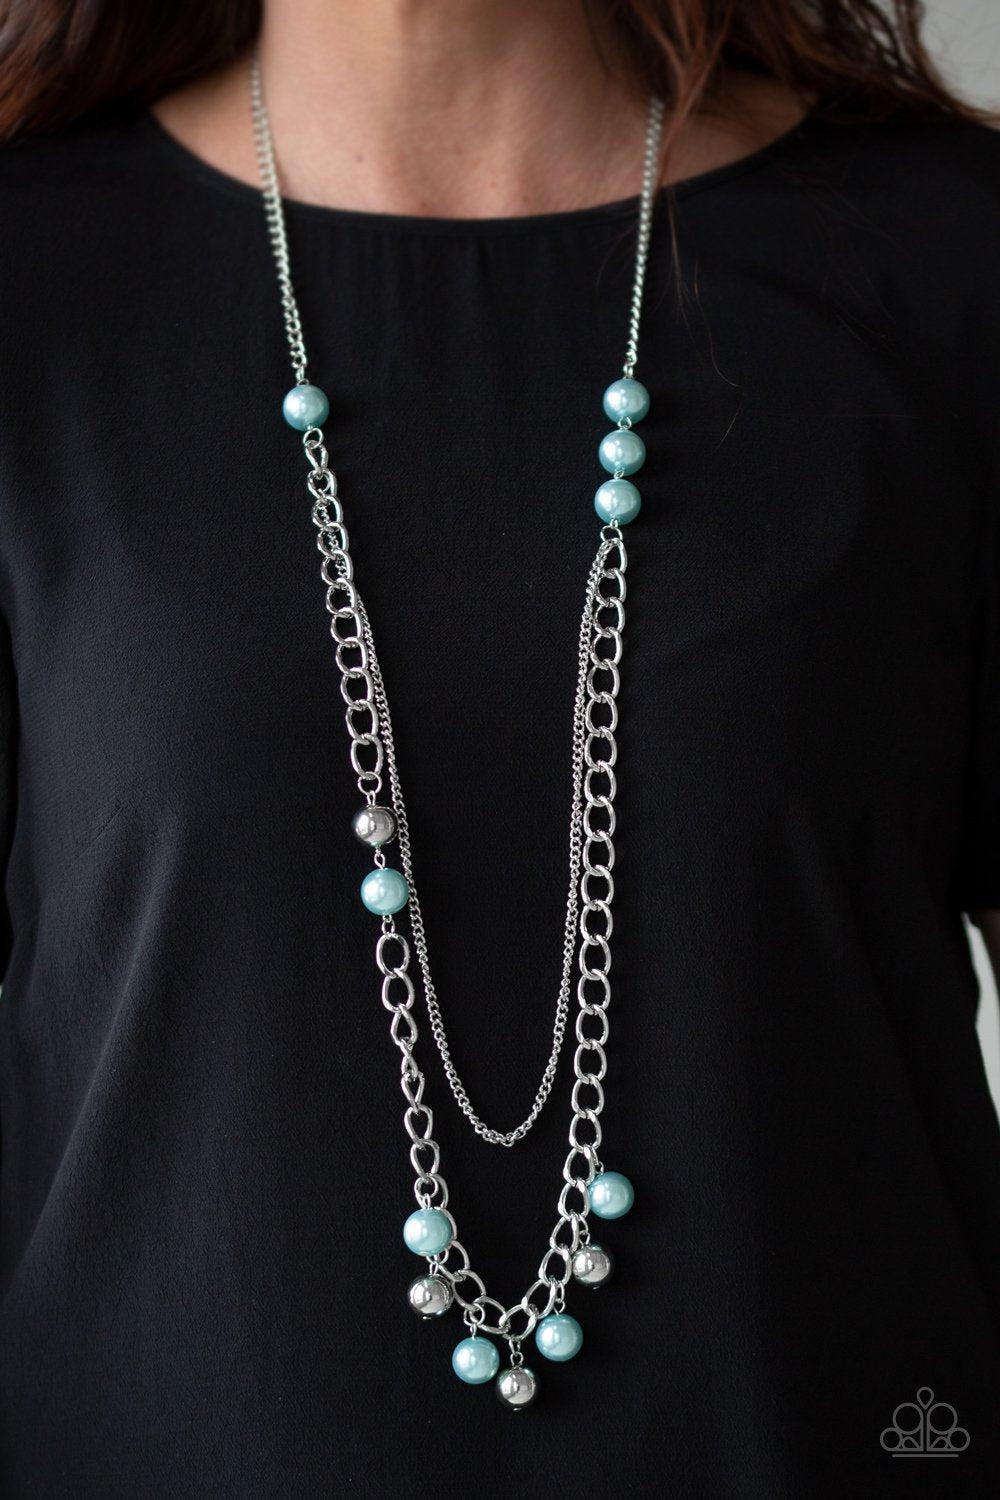 Modern Musical Blue Pearl Necklace - Paparazzi Accessories - model -CarasShop.com - $5 Jewelry by Cara Jewels